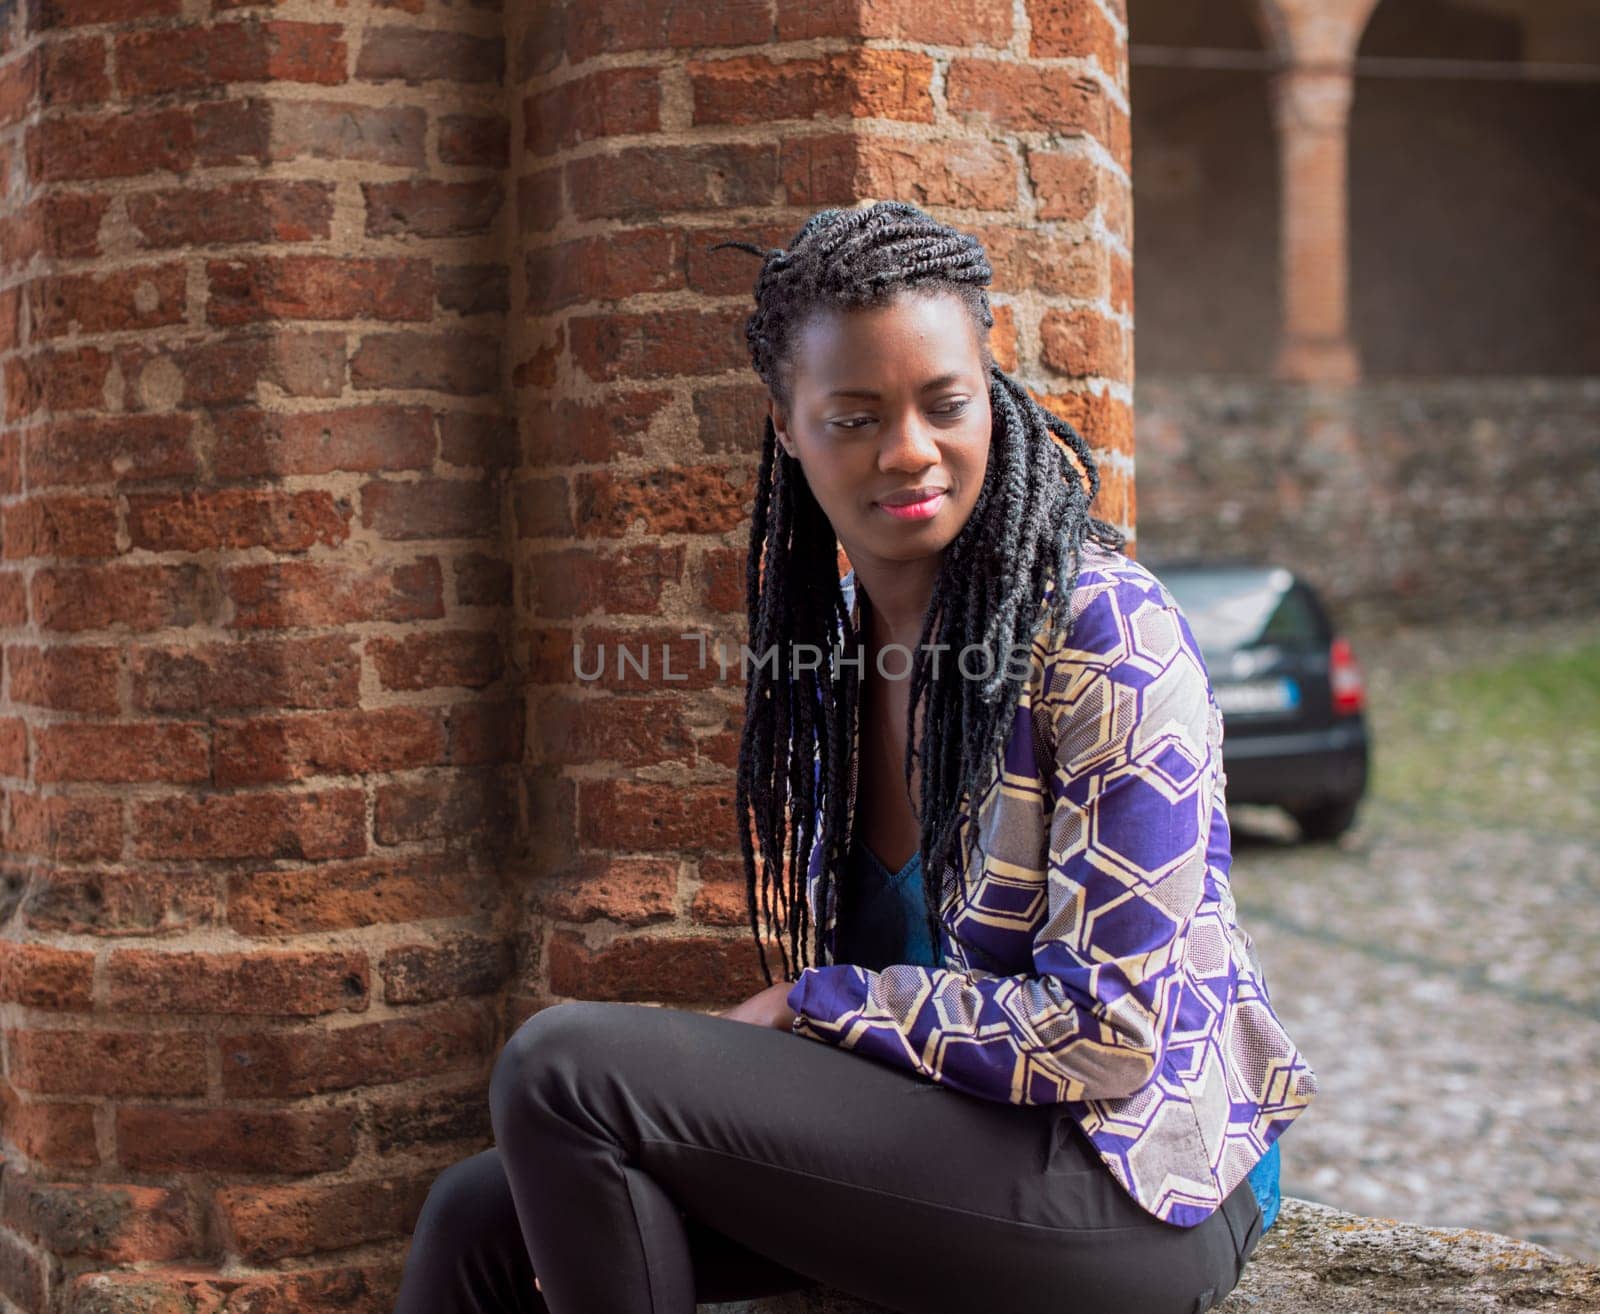 relaxed young black woman sitting. Stylish model. Braid dreadlock hairstyle. Confident African female in selective focus outdoors, fashion style, happiness concept. Outdoors.